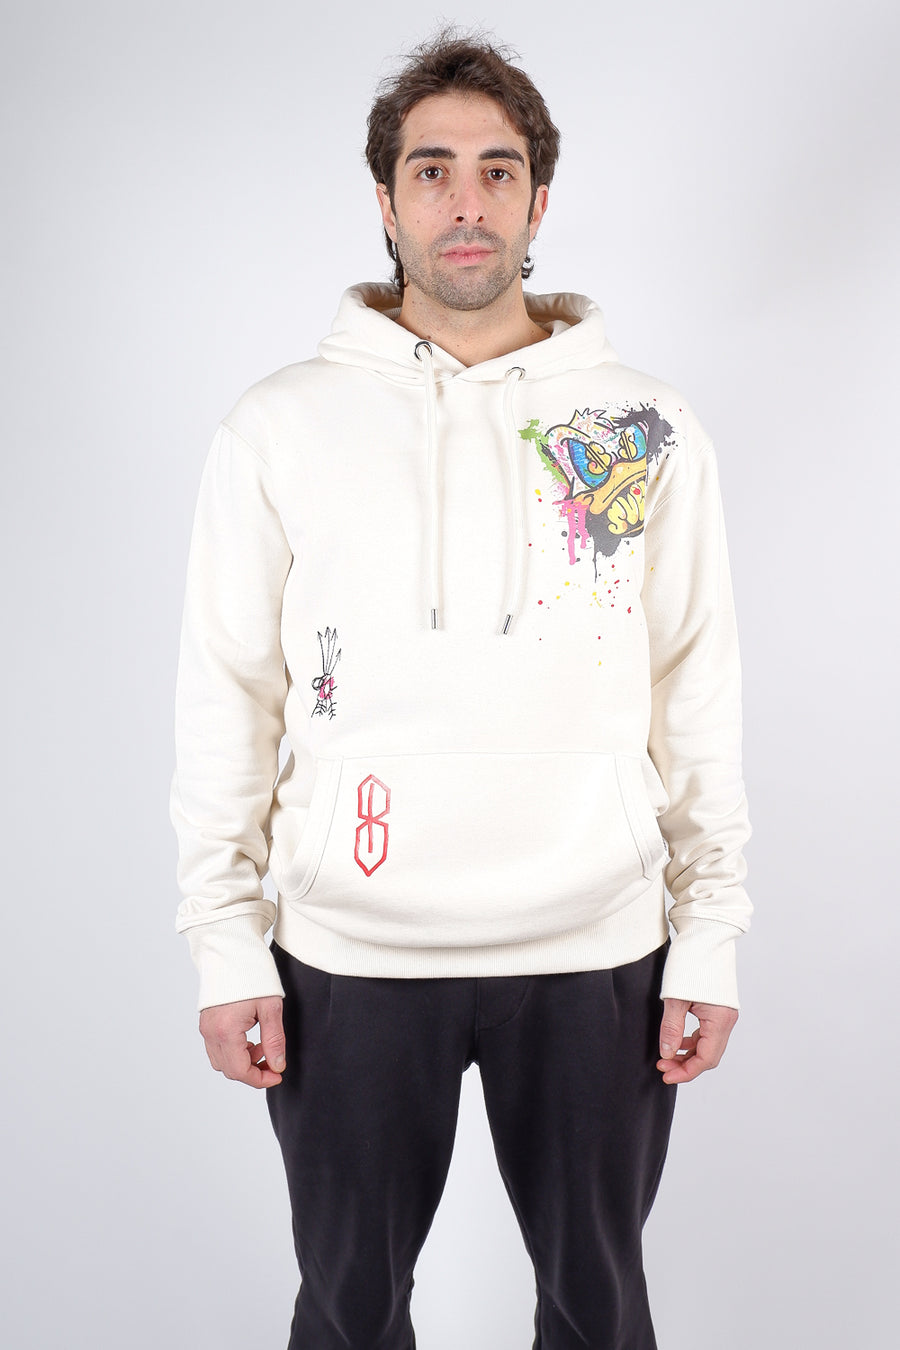 Buy the ABE Donald Hoodie White at Intro. Spend £50 for free UK delivery. Official stockists. We ship worldwide.